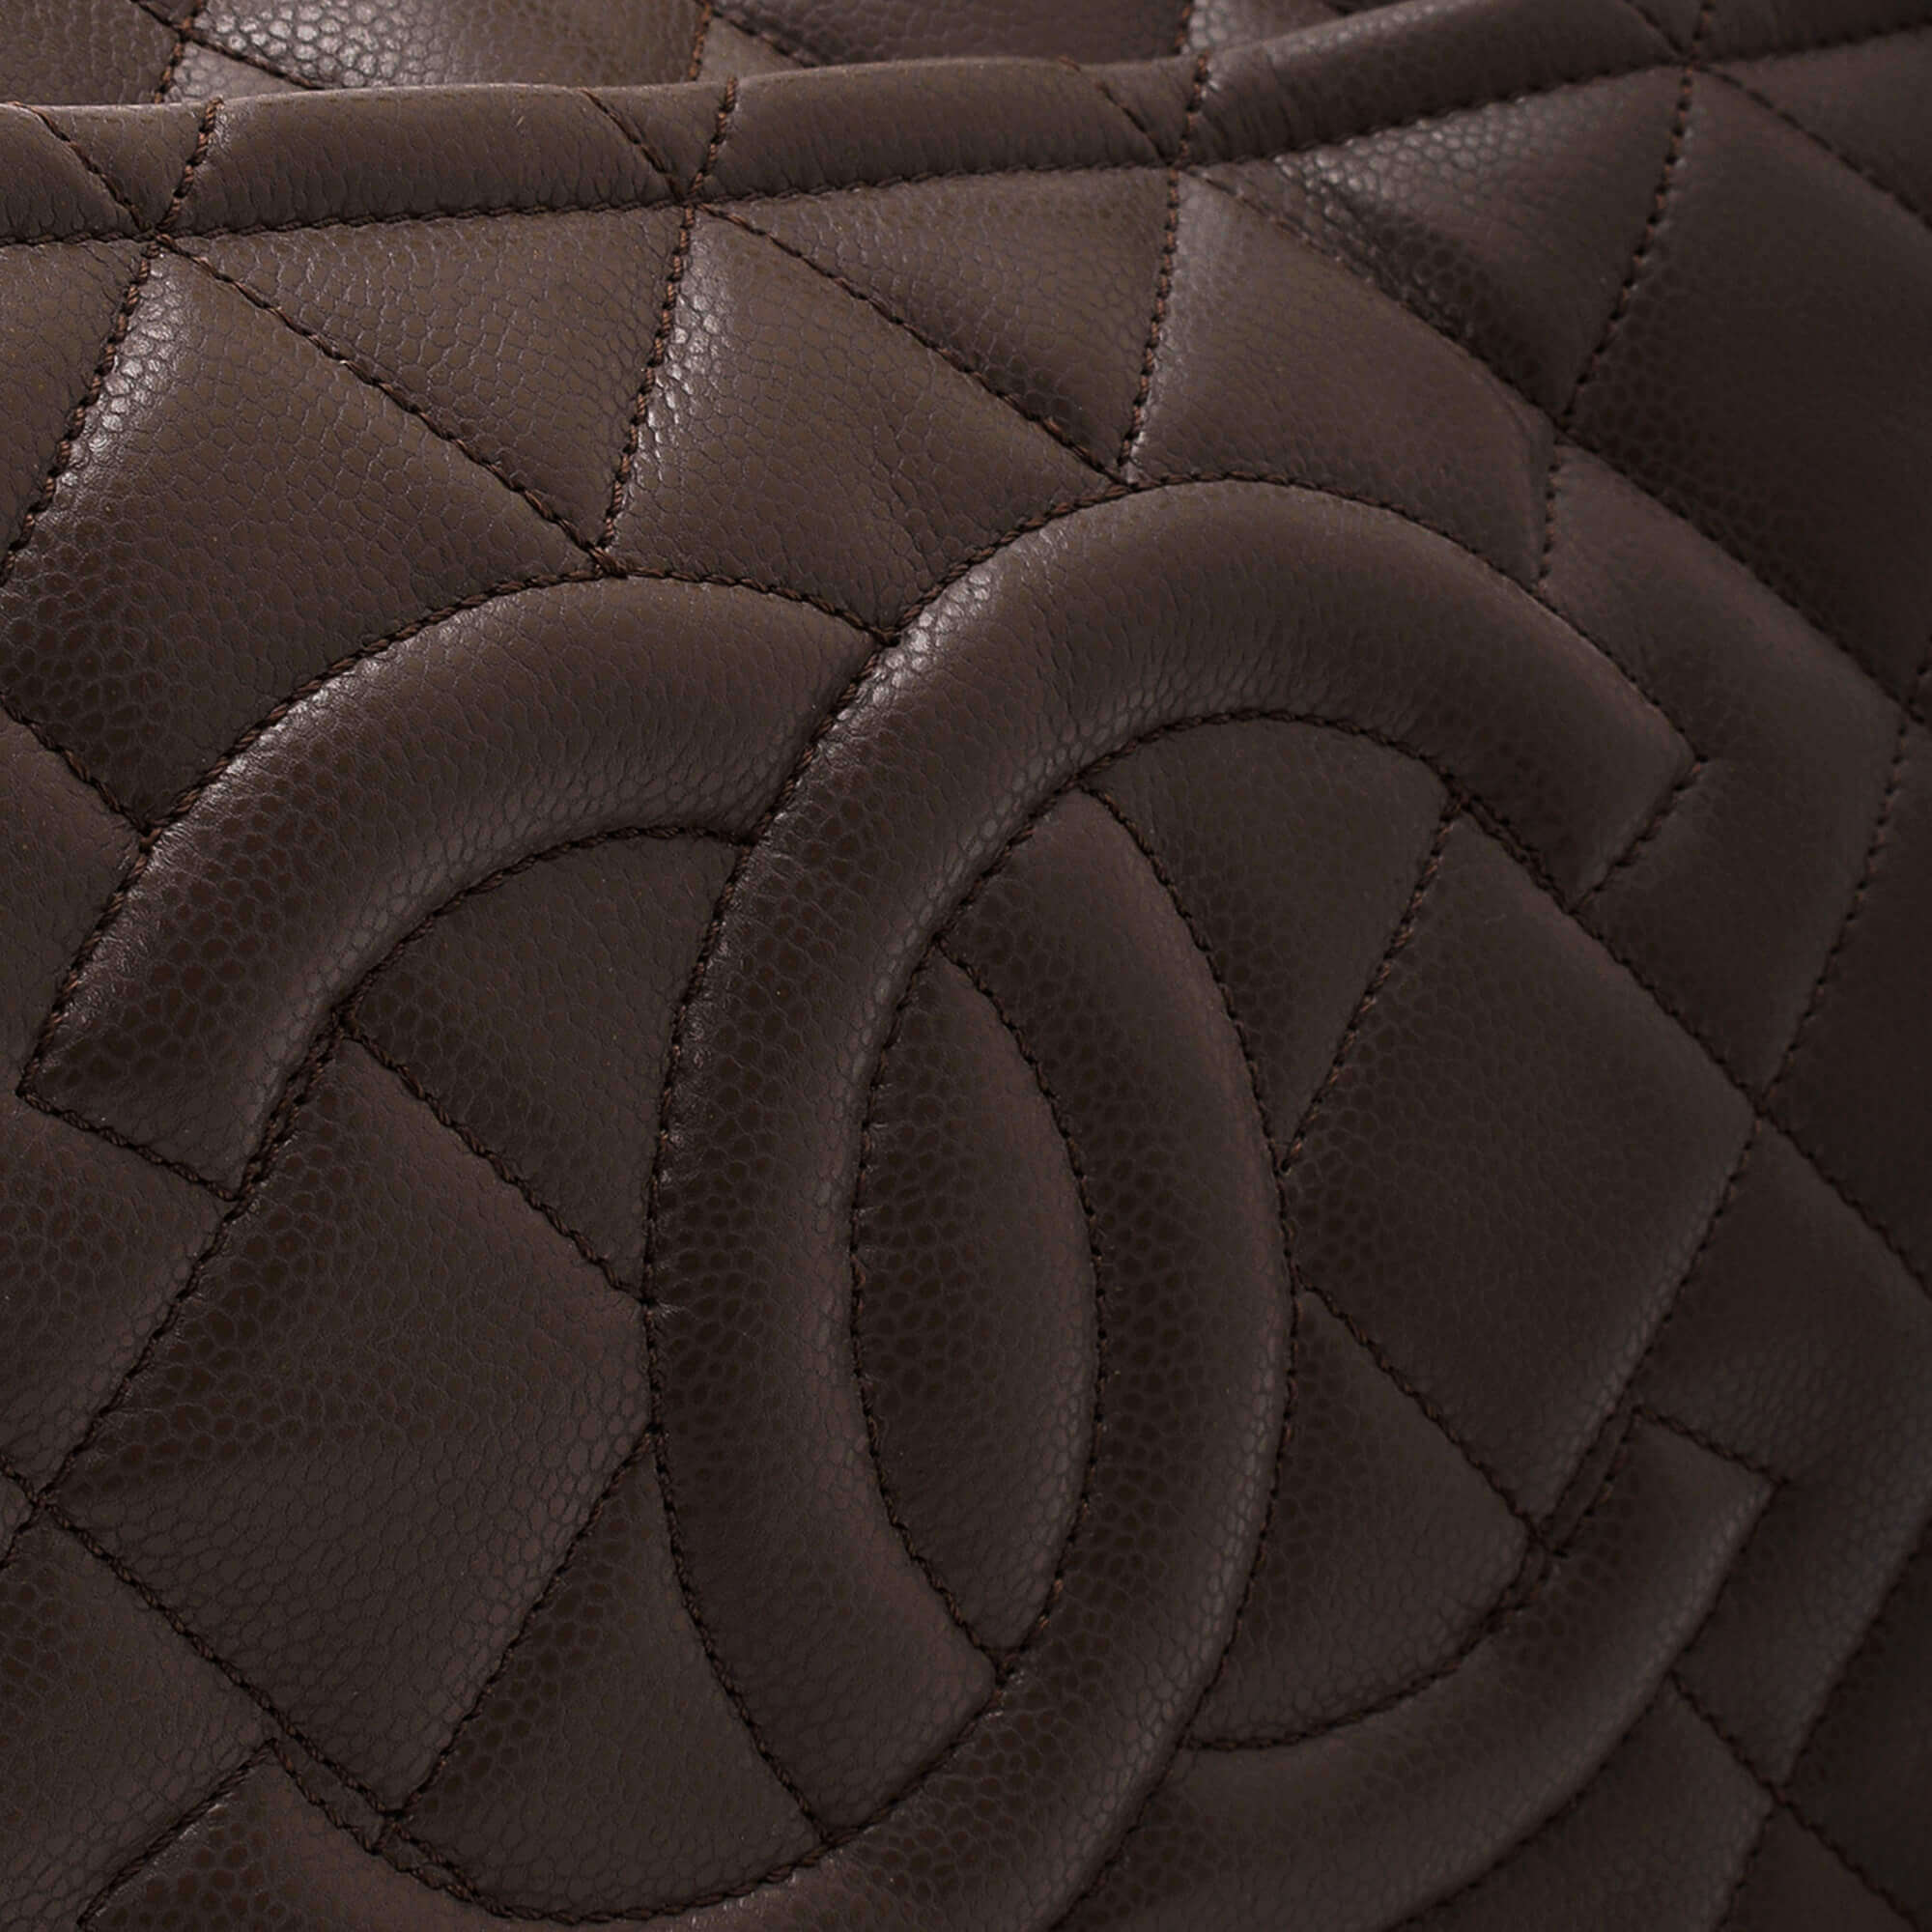 Chanel - Khaki Caviar Leather Quilted CC Logo Tote Bag